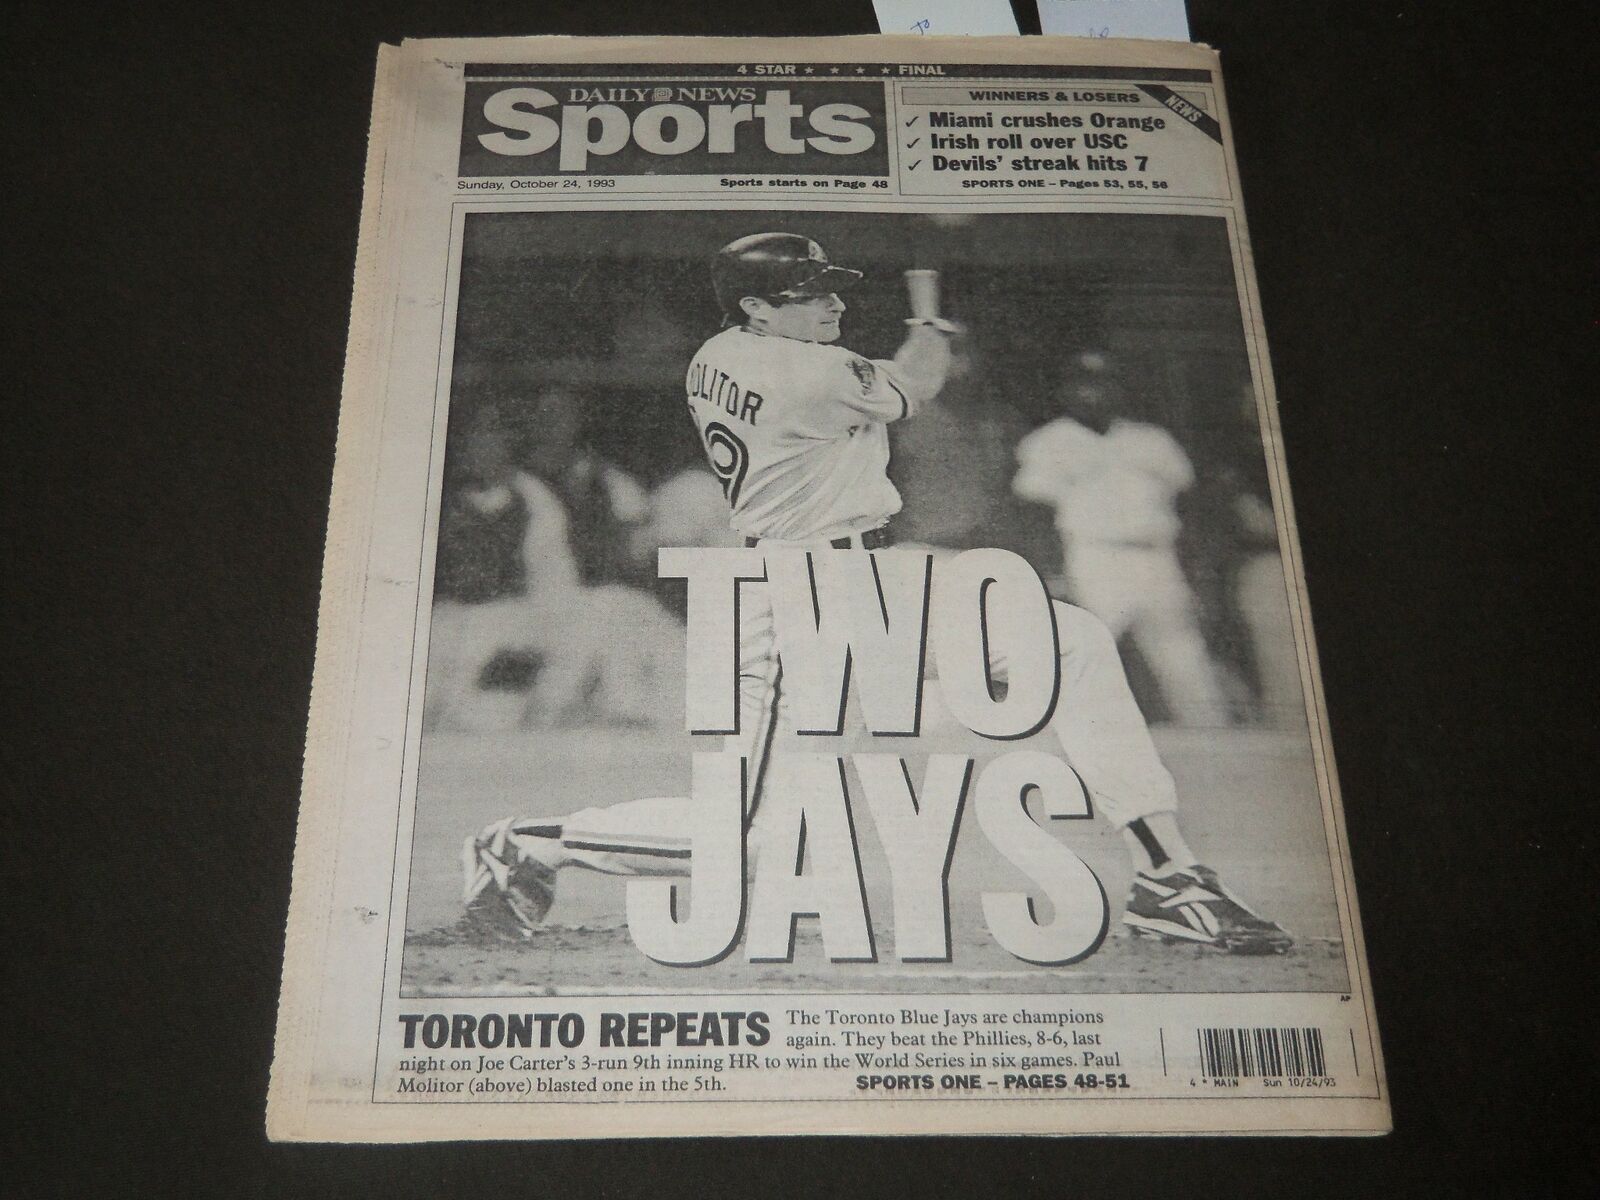 1993 OCTOBER 24 NEW YORK DAILY NEWS - TWO JAYS - TORONTO REPEATS - NP 2613